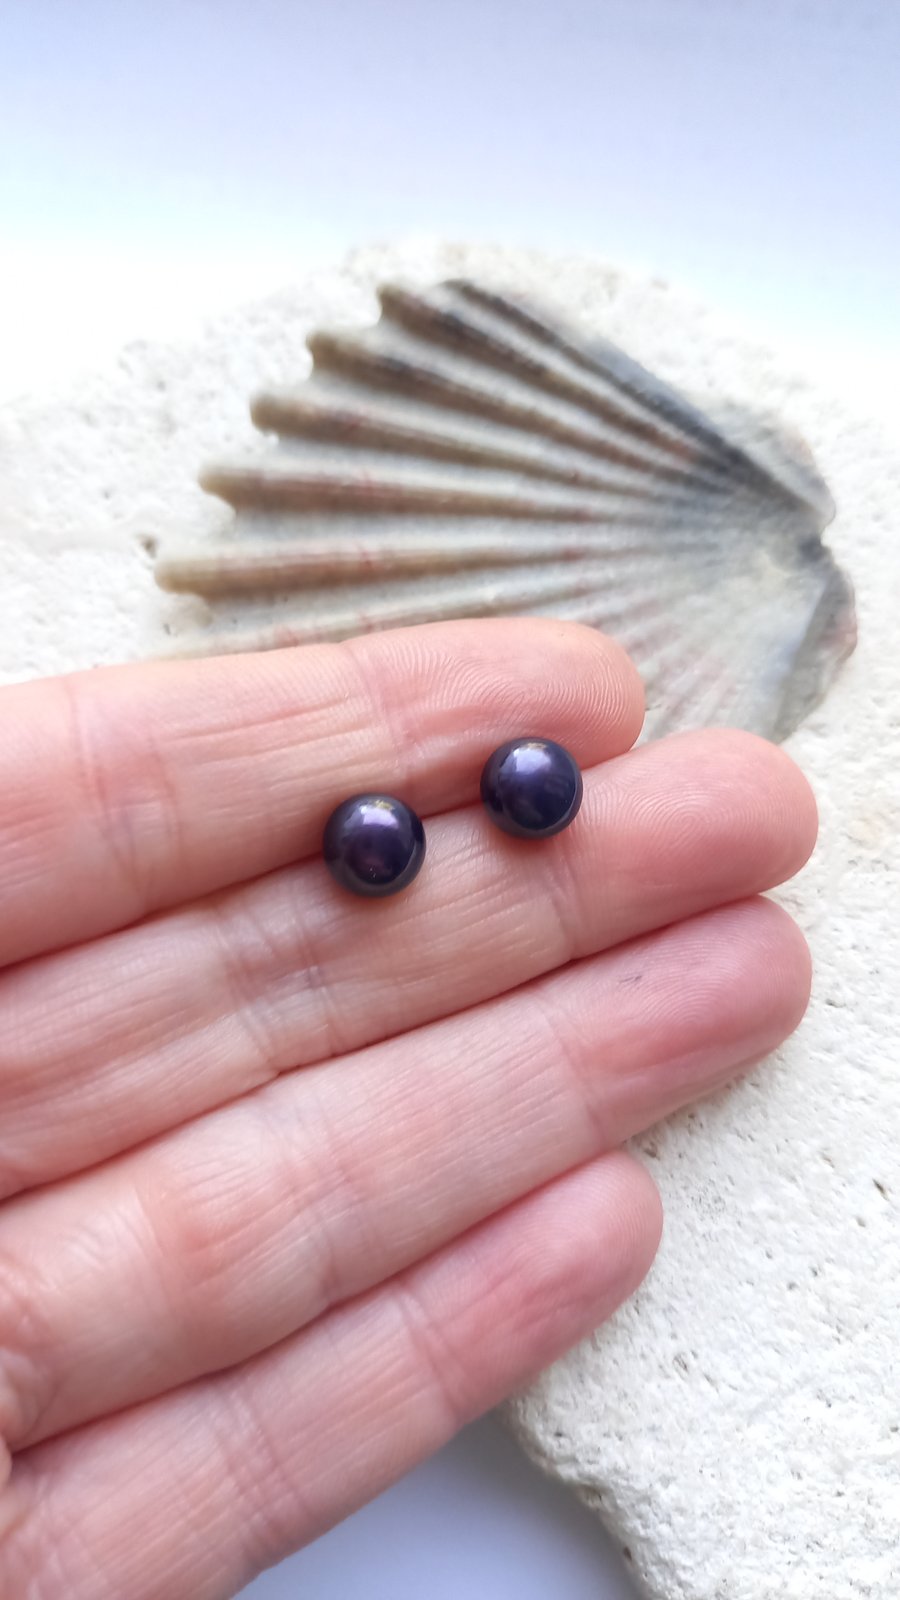 8-9mm Dark Purple Freshwater Pearl Studs with Sterling Silver Posts